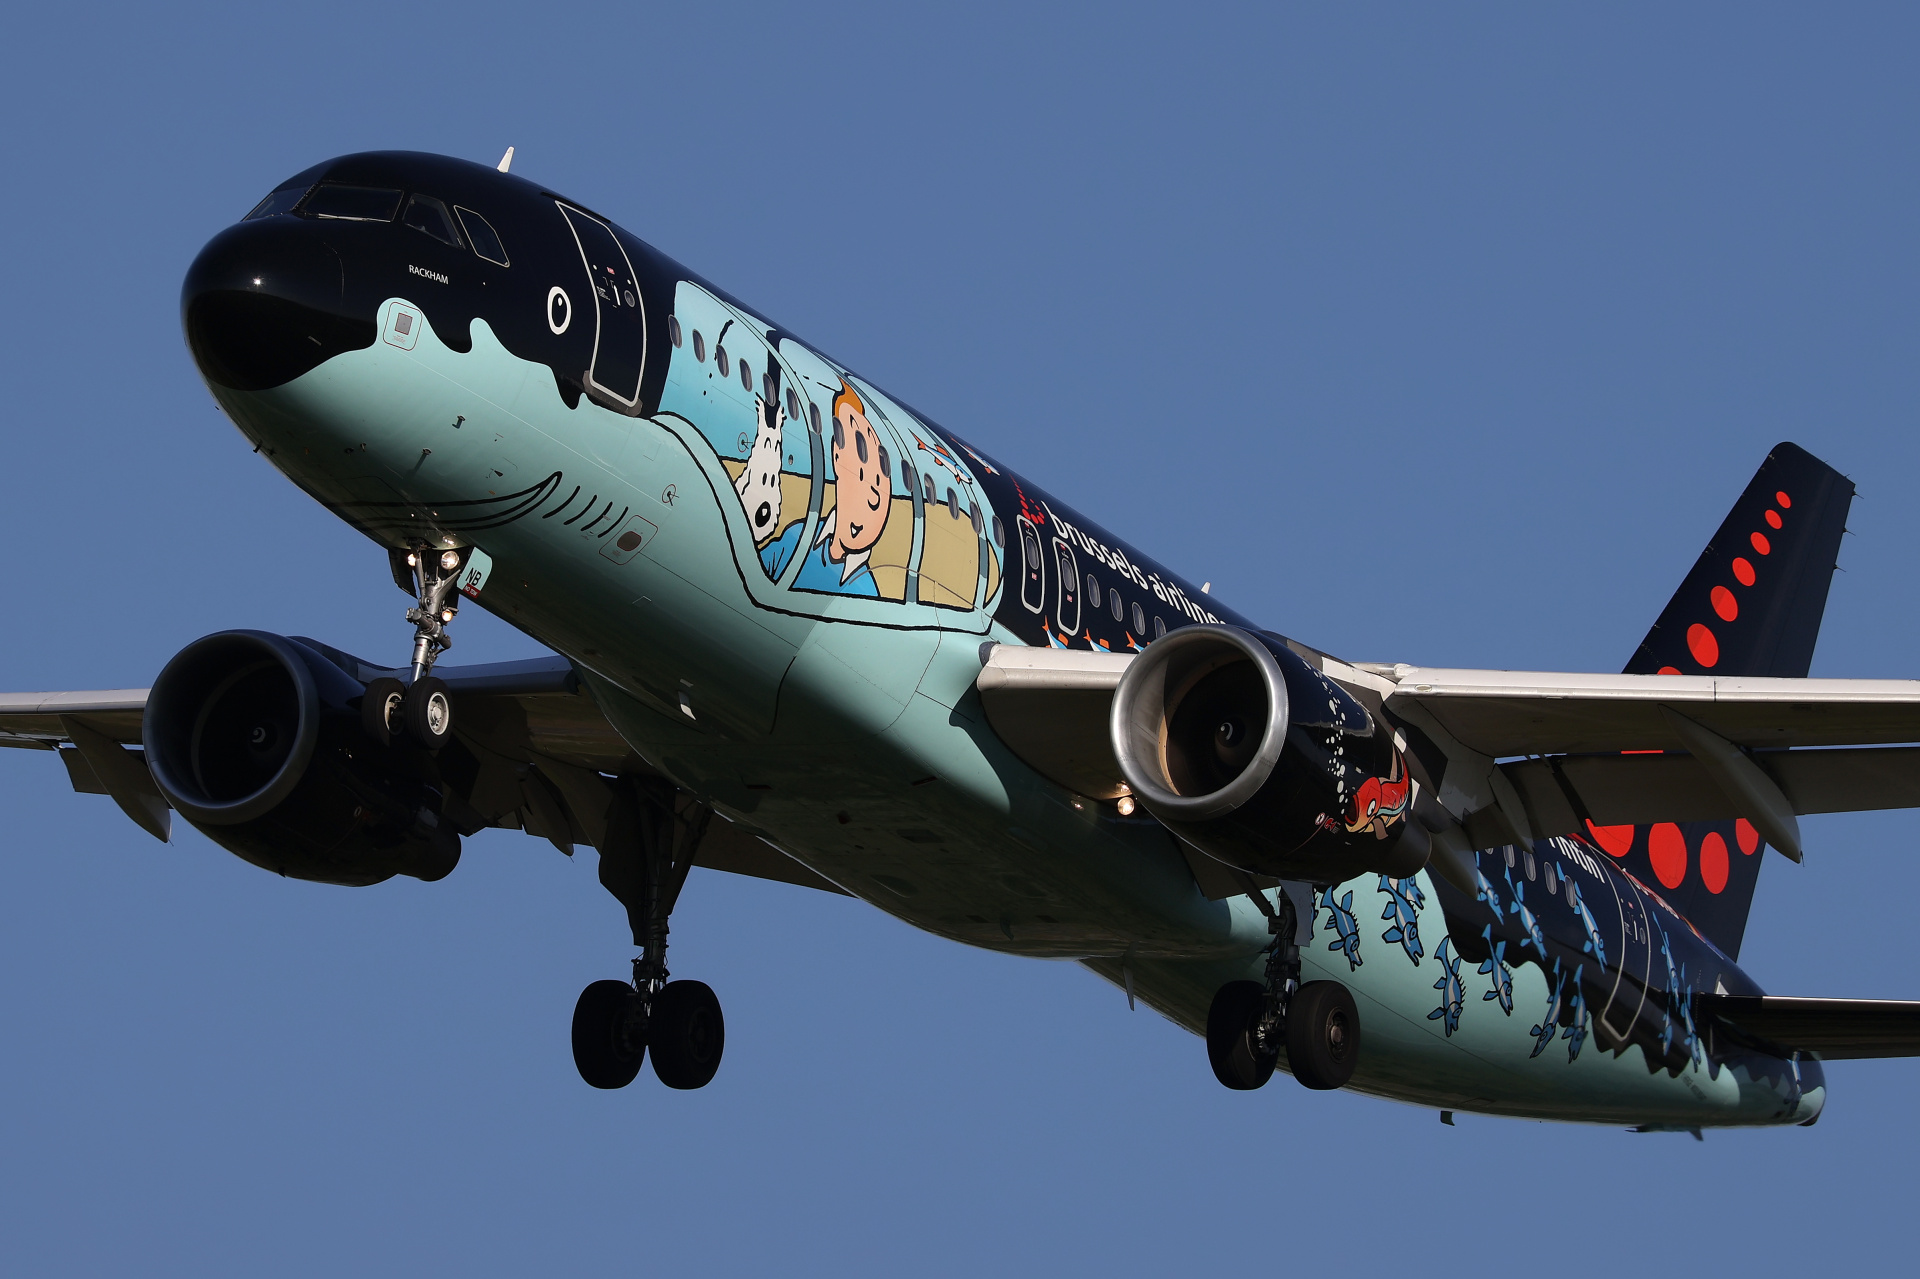 OO-SNB (Belgian Icons - Rackham: Tintin livery) (Aircraft » EPWA Spotting » Airbus A320-200 » Brussels Airlines)